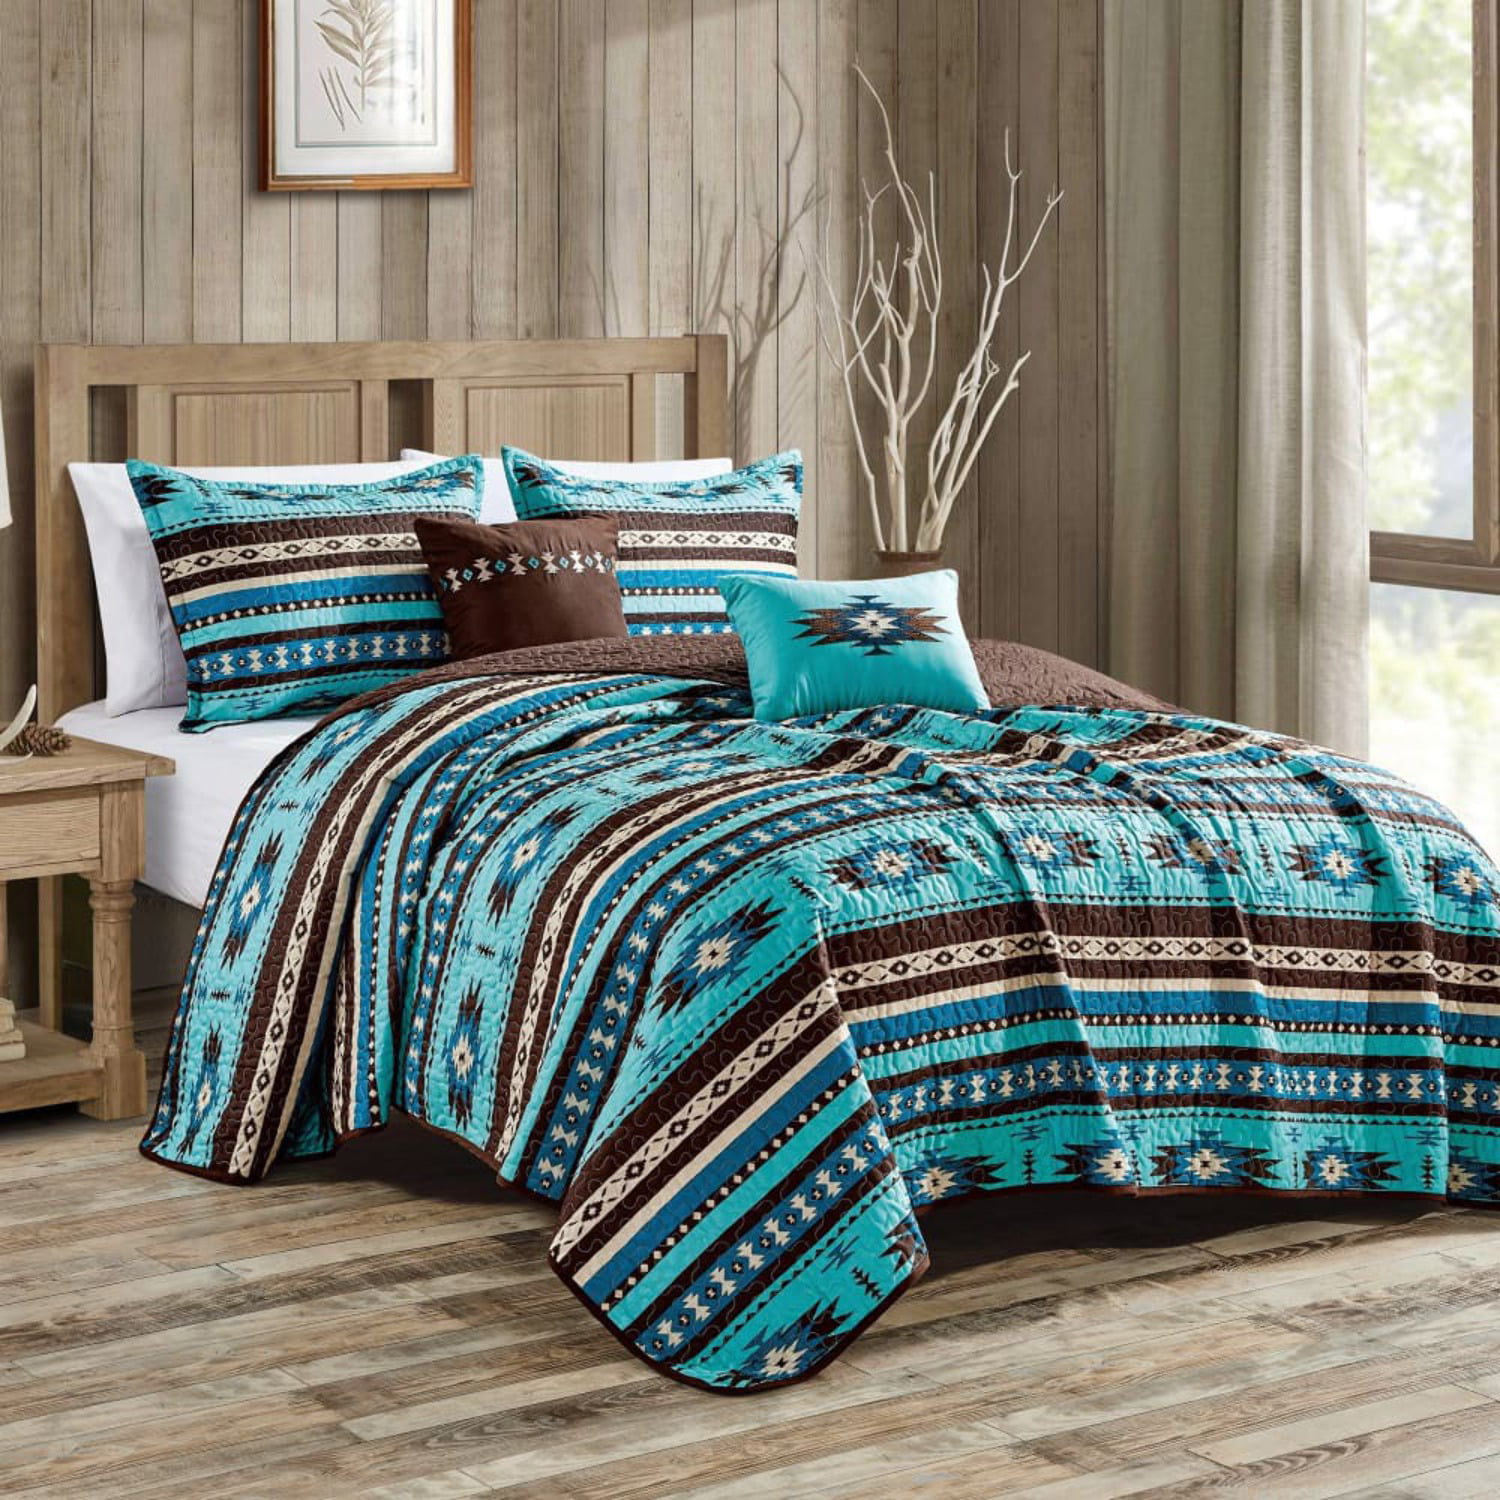 Details about   King Southwestern Aztec Tribal Red Turquoise Cabin Comforter Set 7 Piece Set 